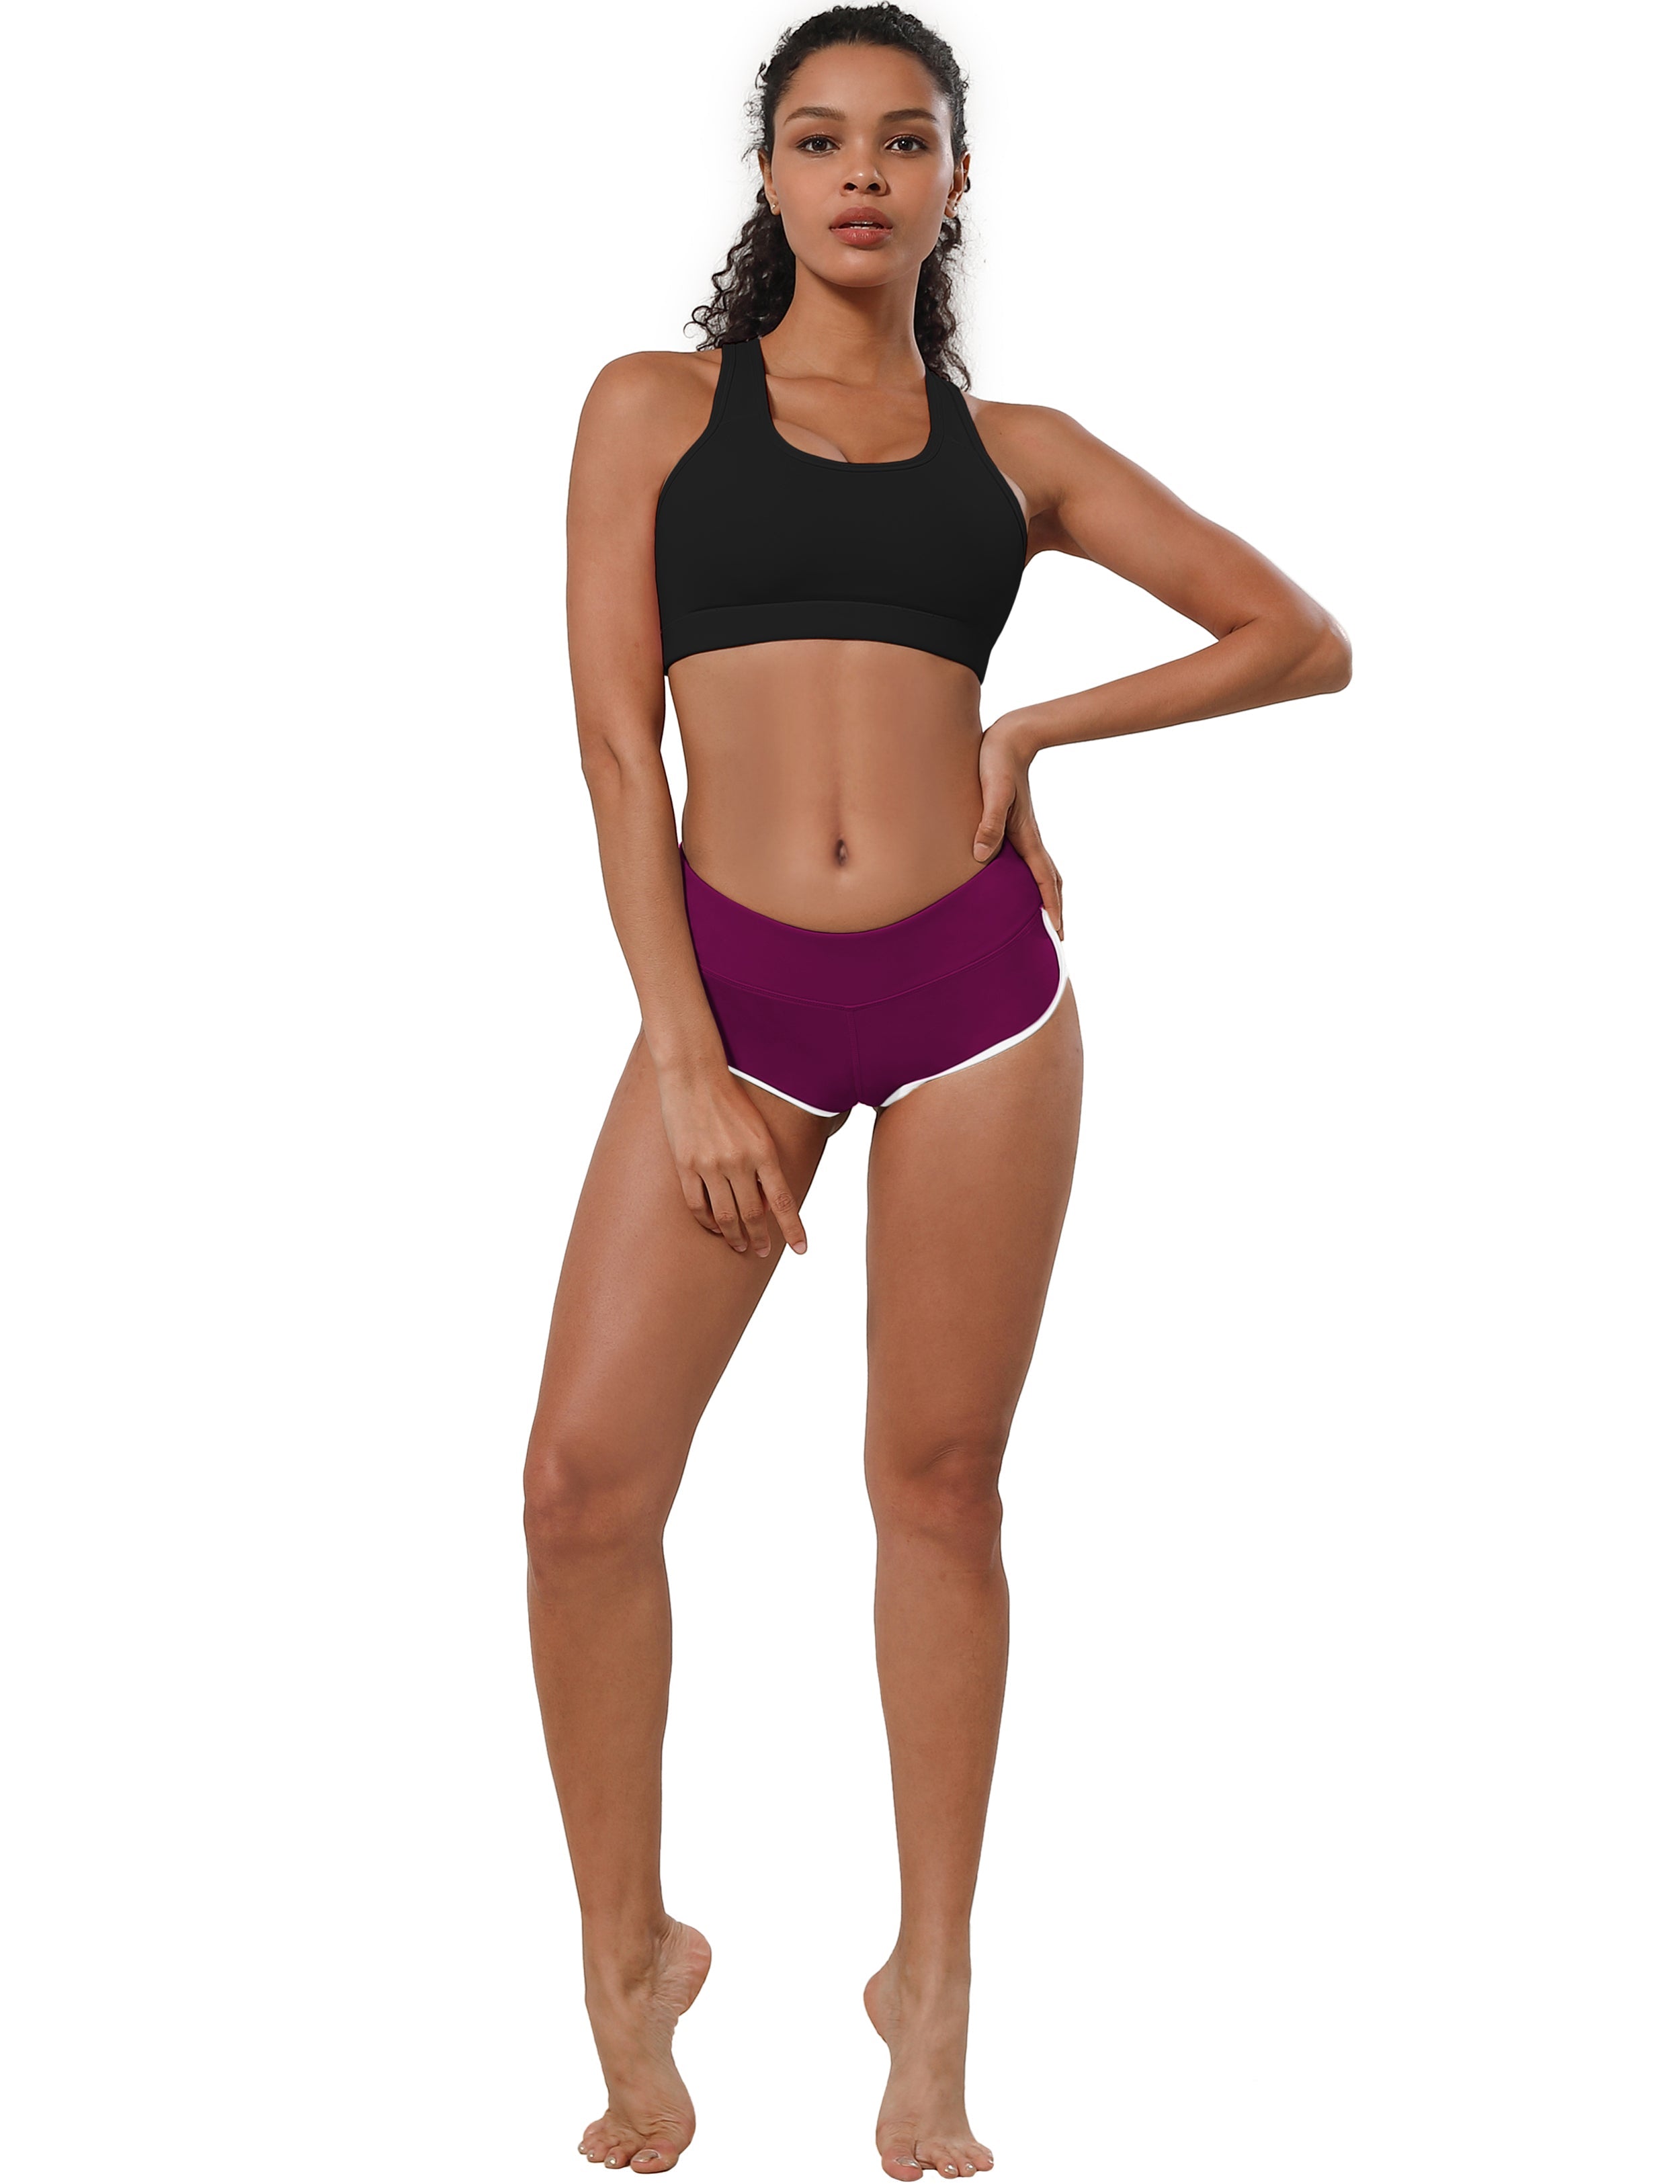 Sexy Booty Pilates Shorts grapevine Sleek, soft, smooth and totally comfortable: our newest sexy style is here. Softest-ever fabric High elasticity High density 4-way stretch Fabric doesn't attract lint easily No see-through Moisture-wicking Machine wash 75%Nylon/25%Spandex